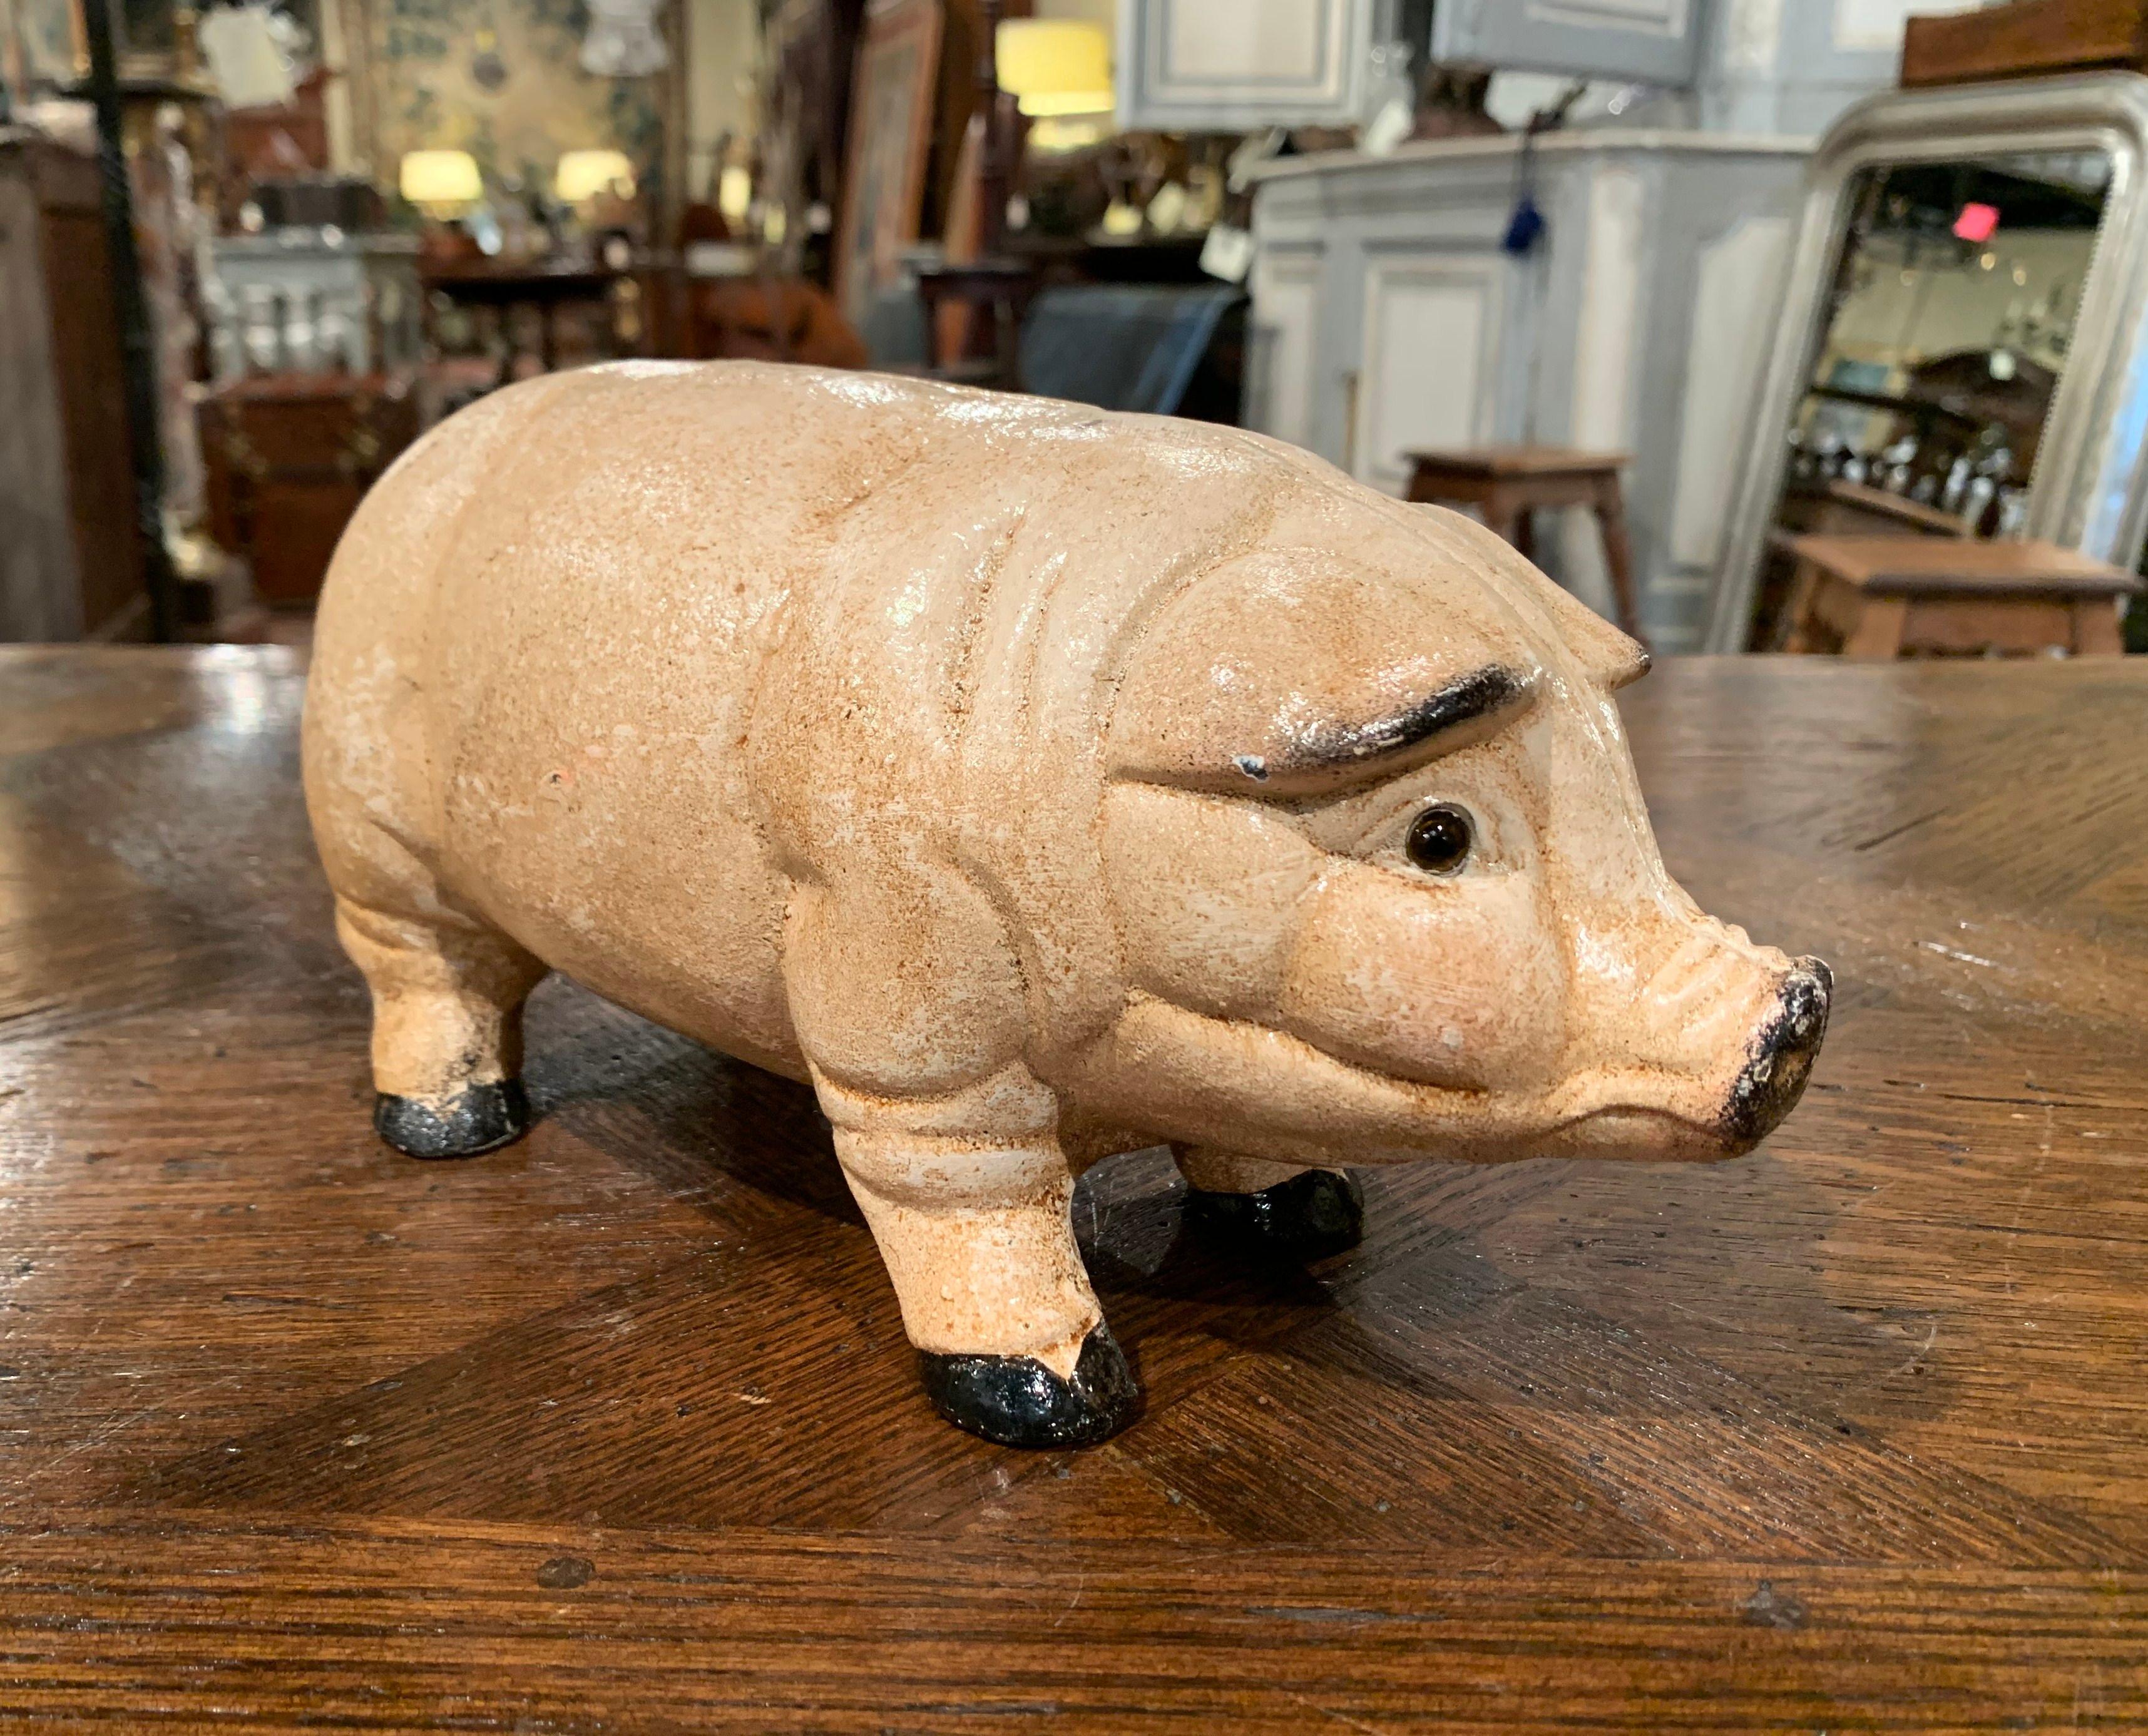 Crafted in France, circa 1960, the hand painted iron pig sculpture equipped with a slot for coins at the top, has a beautiful beige patinated finish, and very realistic shape and details. The piggy bank figure is in excellent condition overall, and